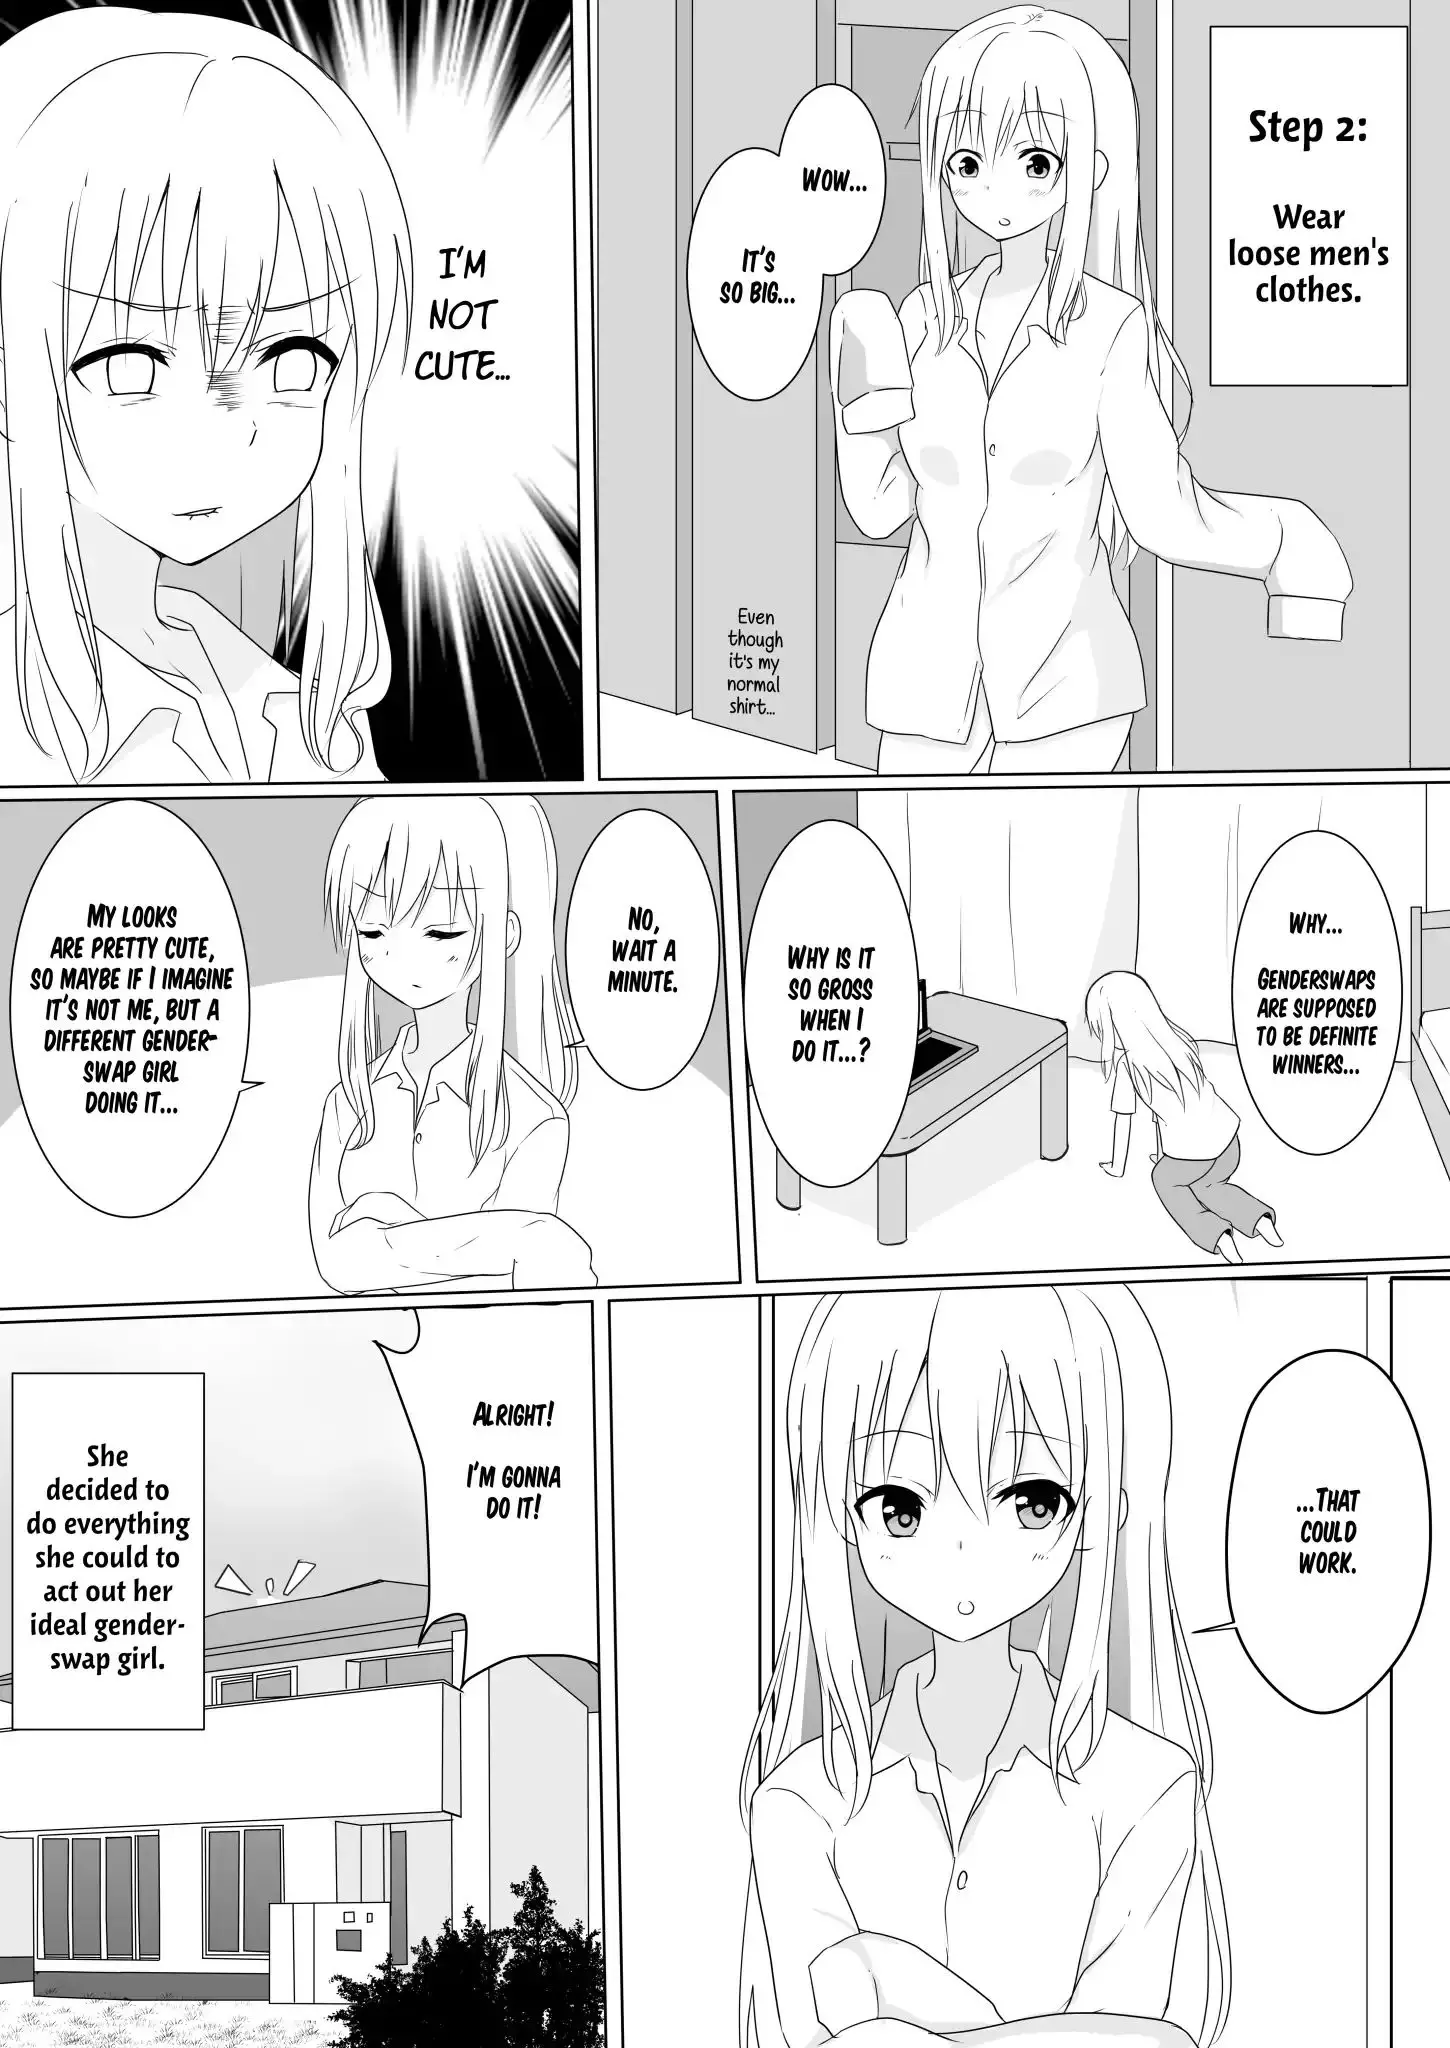 A Boy Who Loves Genderswap Got Genderswapped So He Acts Out His Ideal Genderswap Girl - 1 page 4